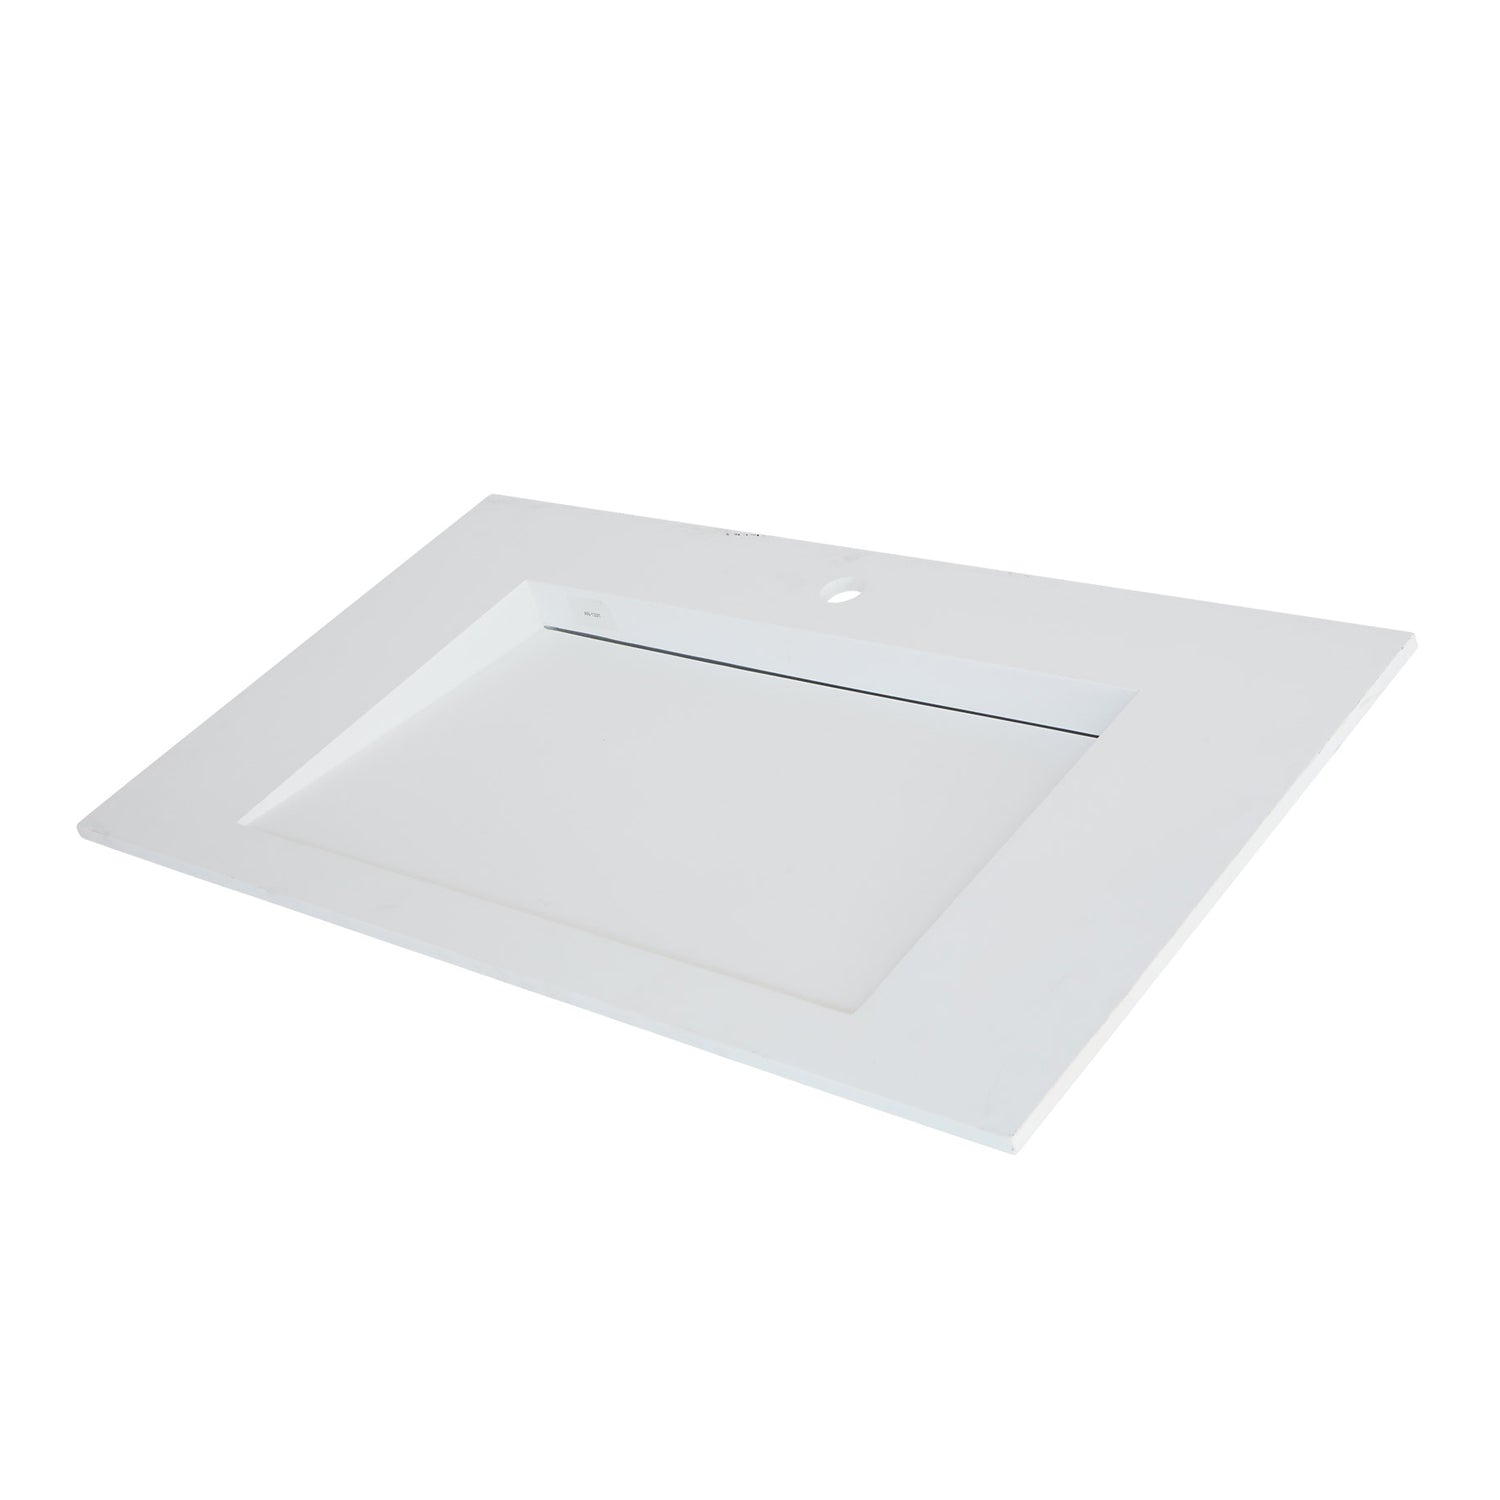 DAX Solid Surface Rectangle Single Bowl Top Mount Bathroom Sink, White Matte Finish,  35-1/4 x 19-5/8 x 3-1/2 Inches (DAX-AB-1331)